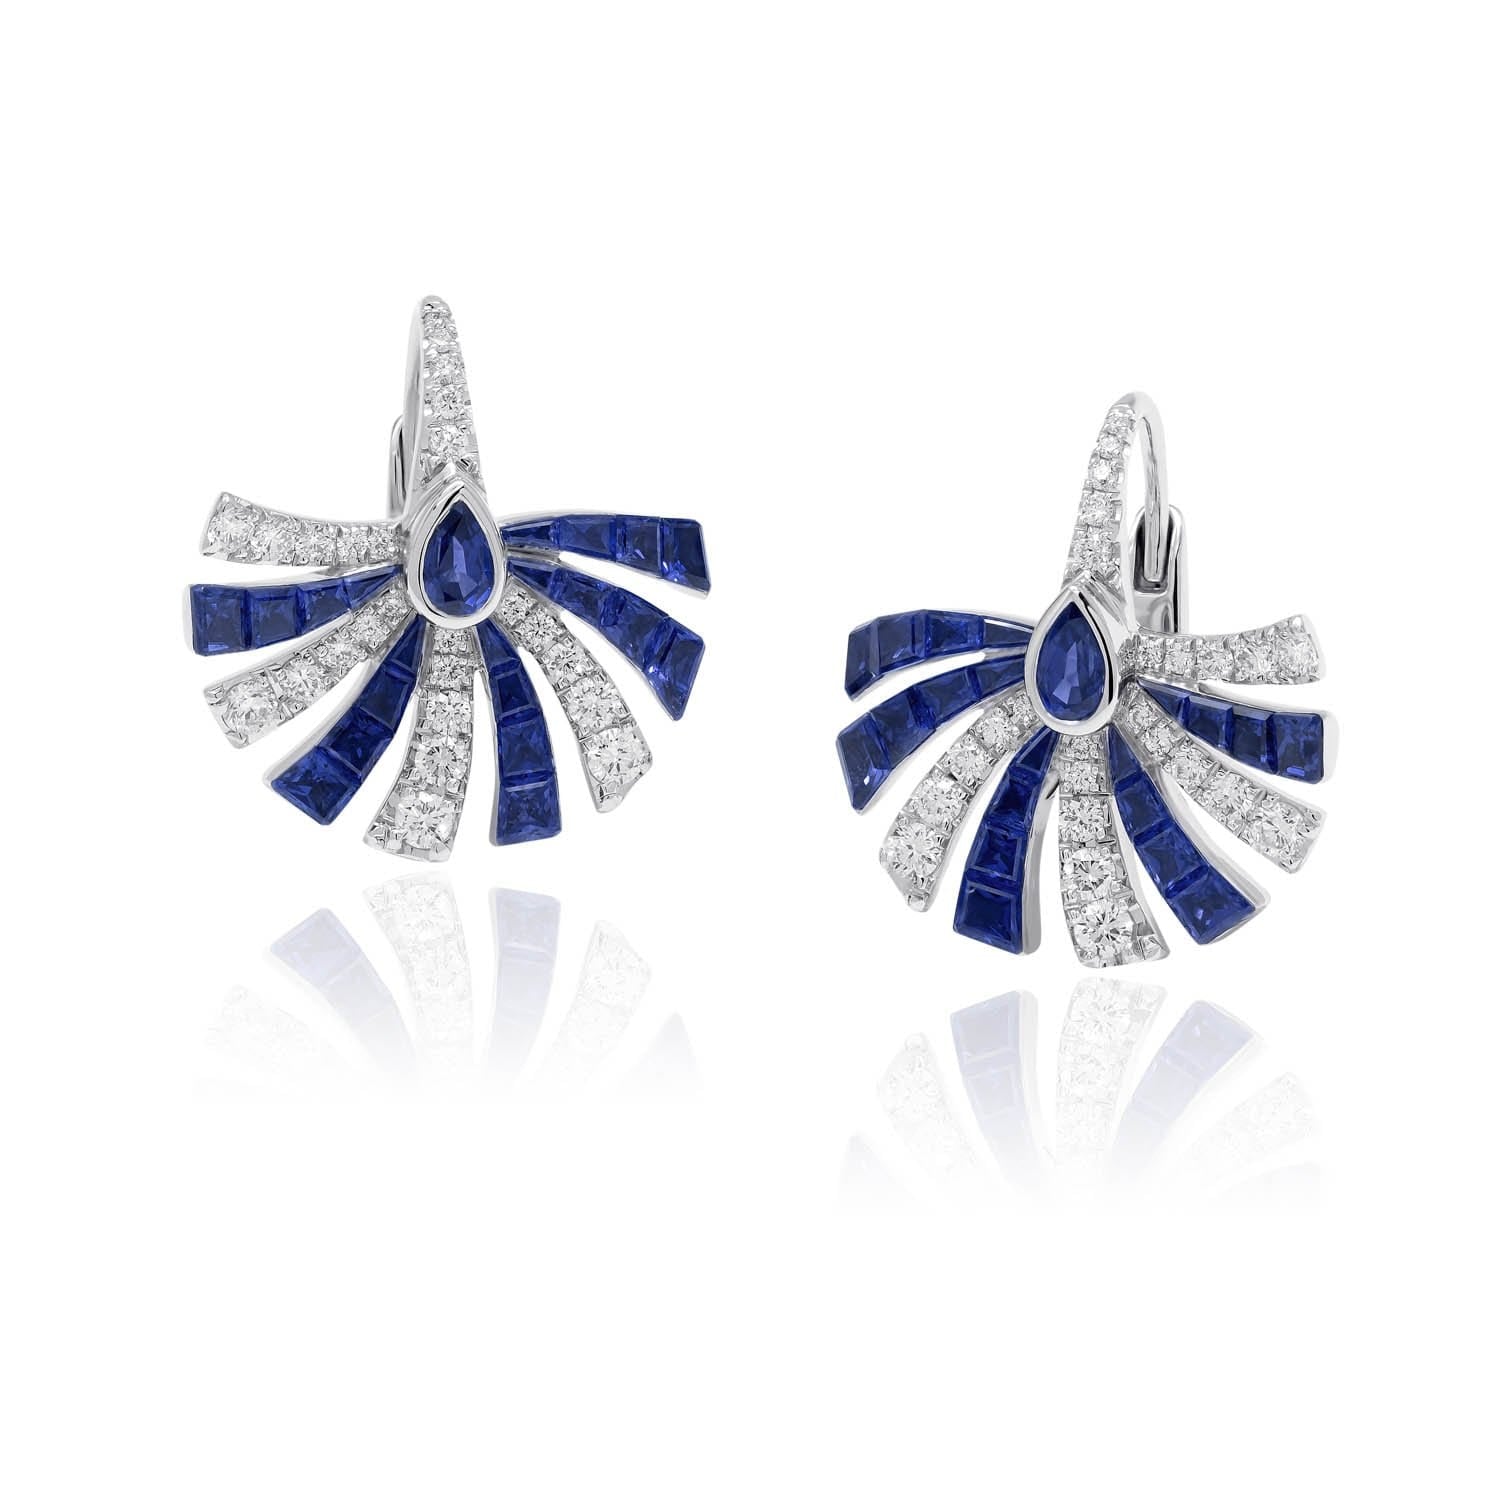 PERSUASION Sapphire and Diamond Smaller Earrings